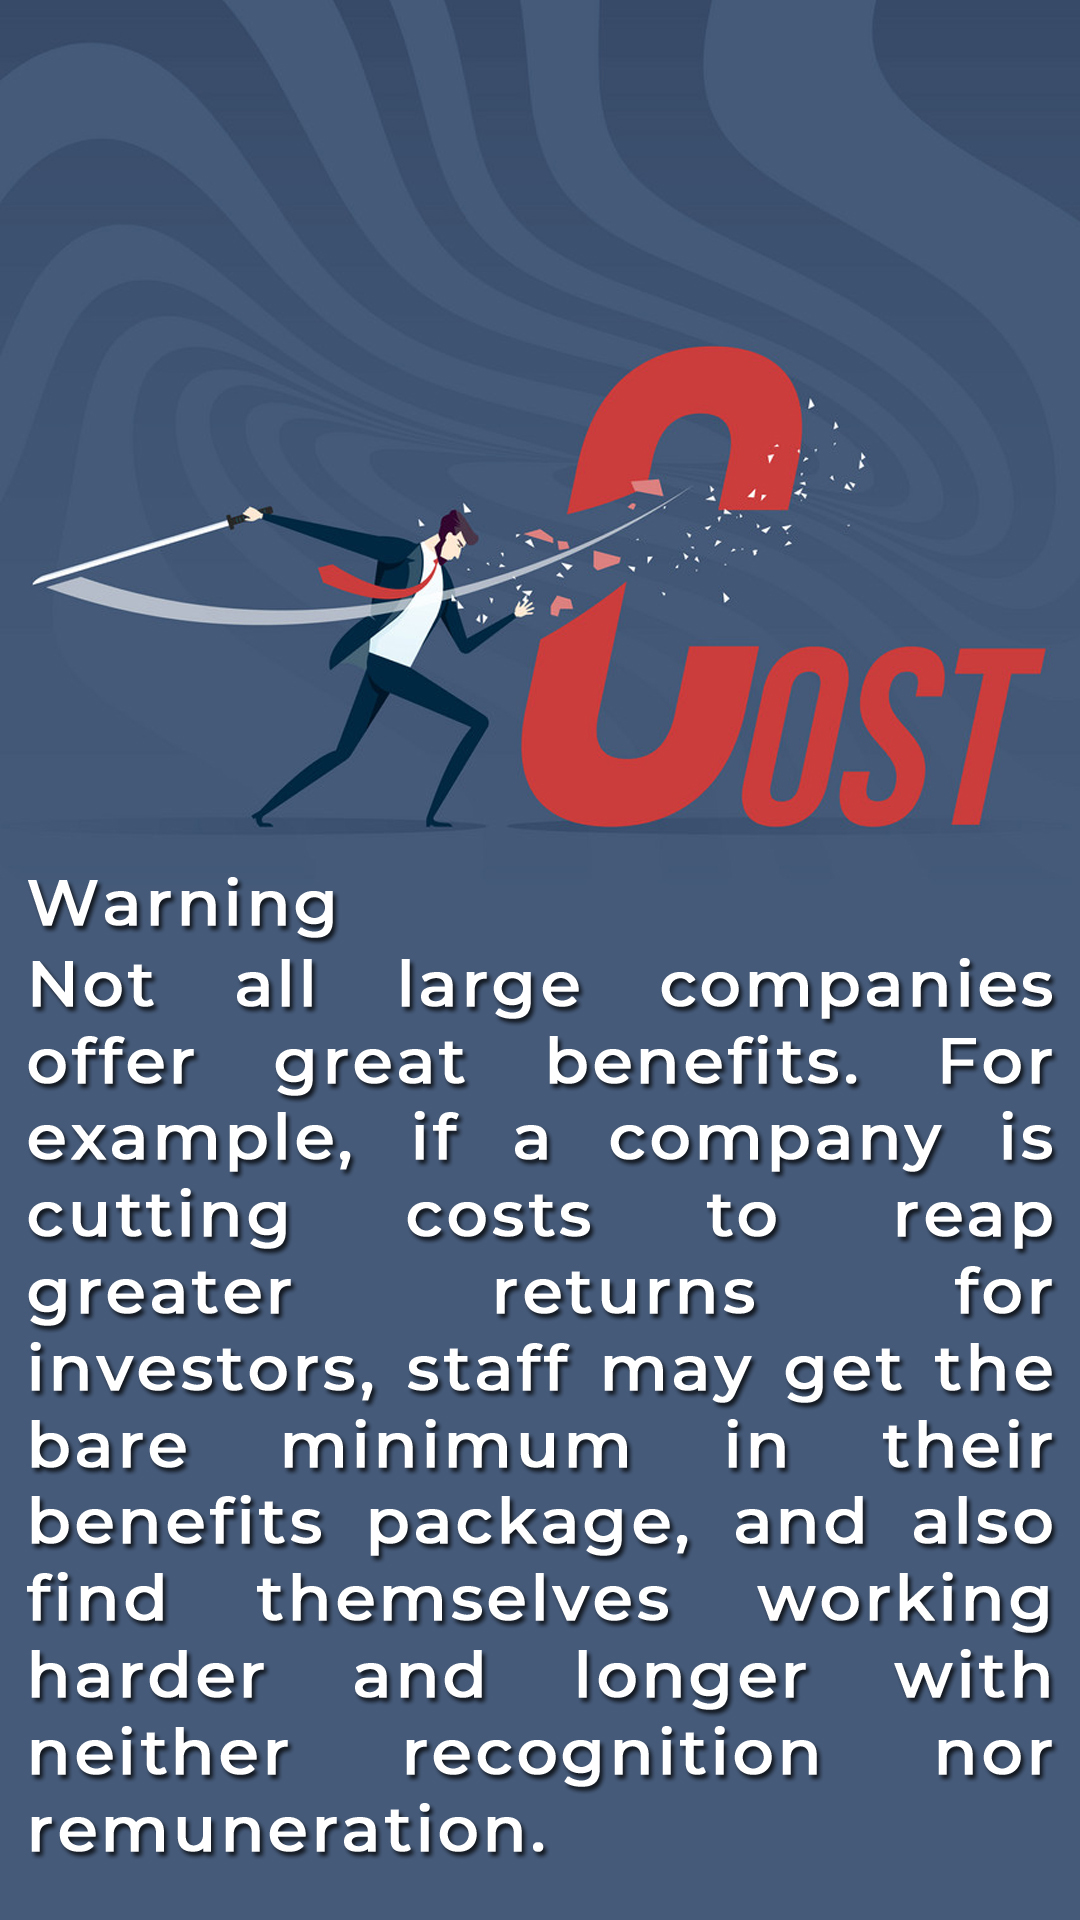 NOT ALL LARGE COMPANIES OFFER GREAT BENEFITS